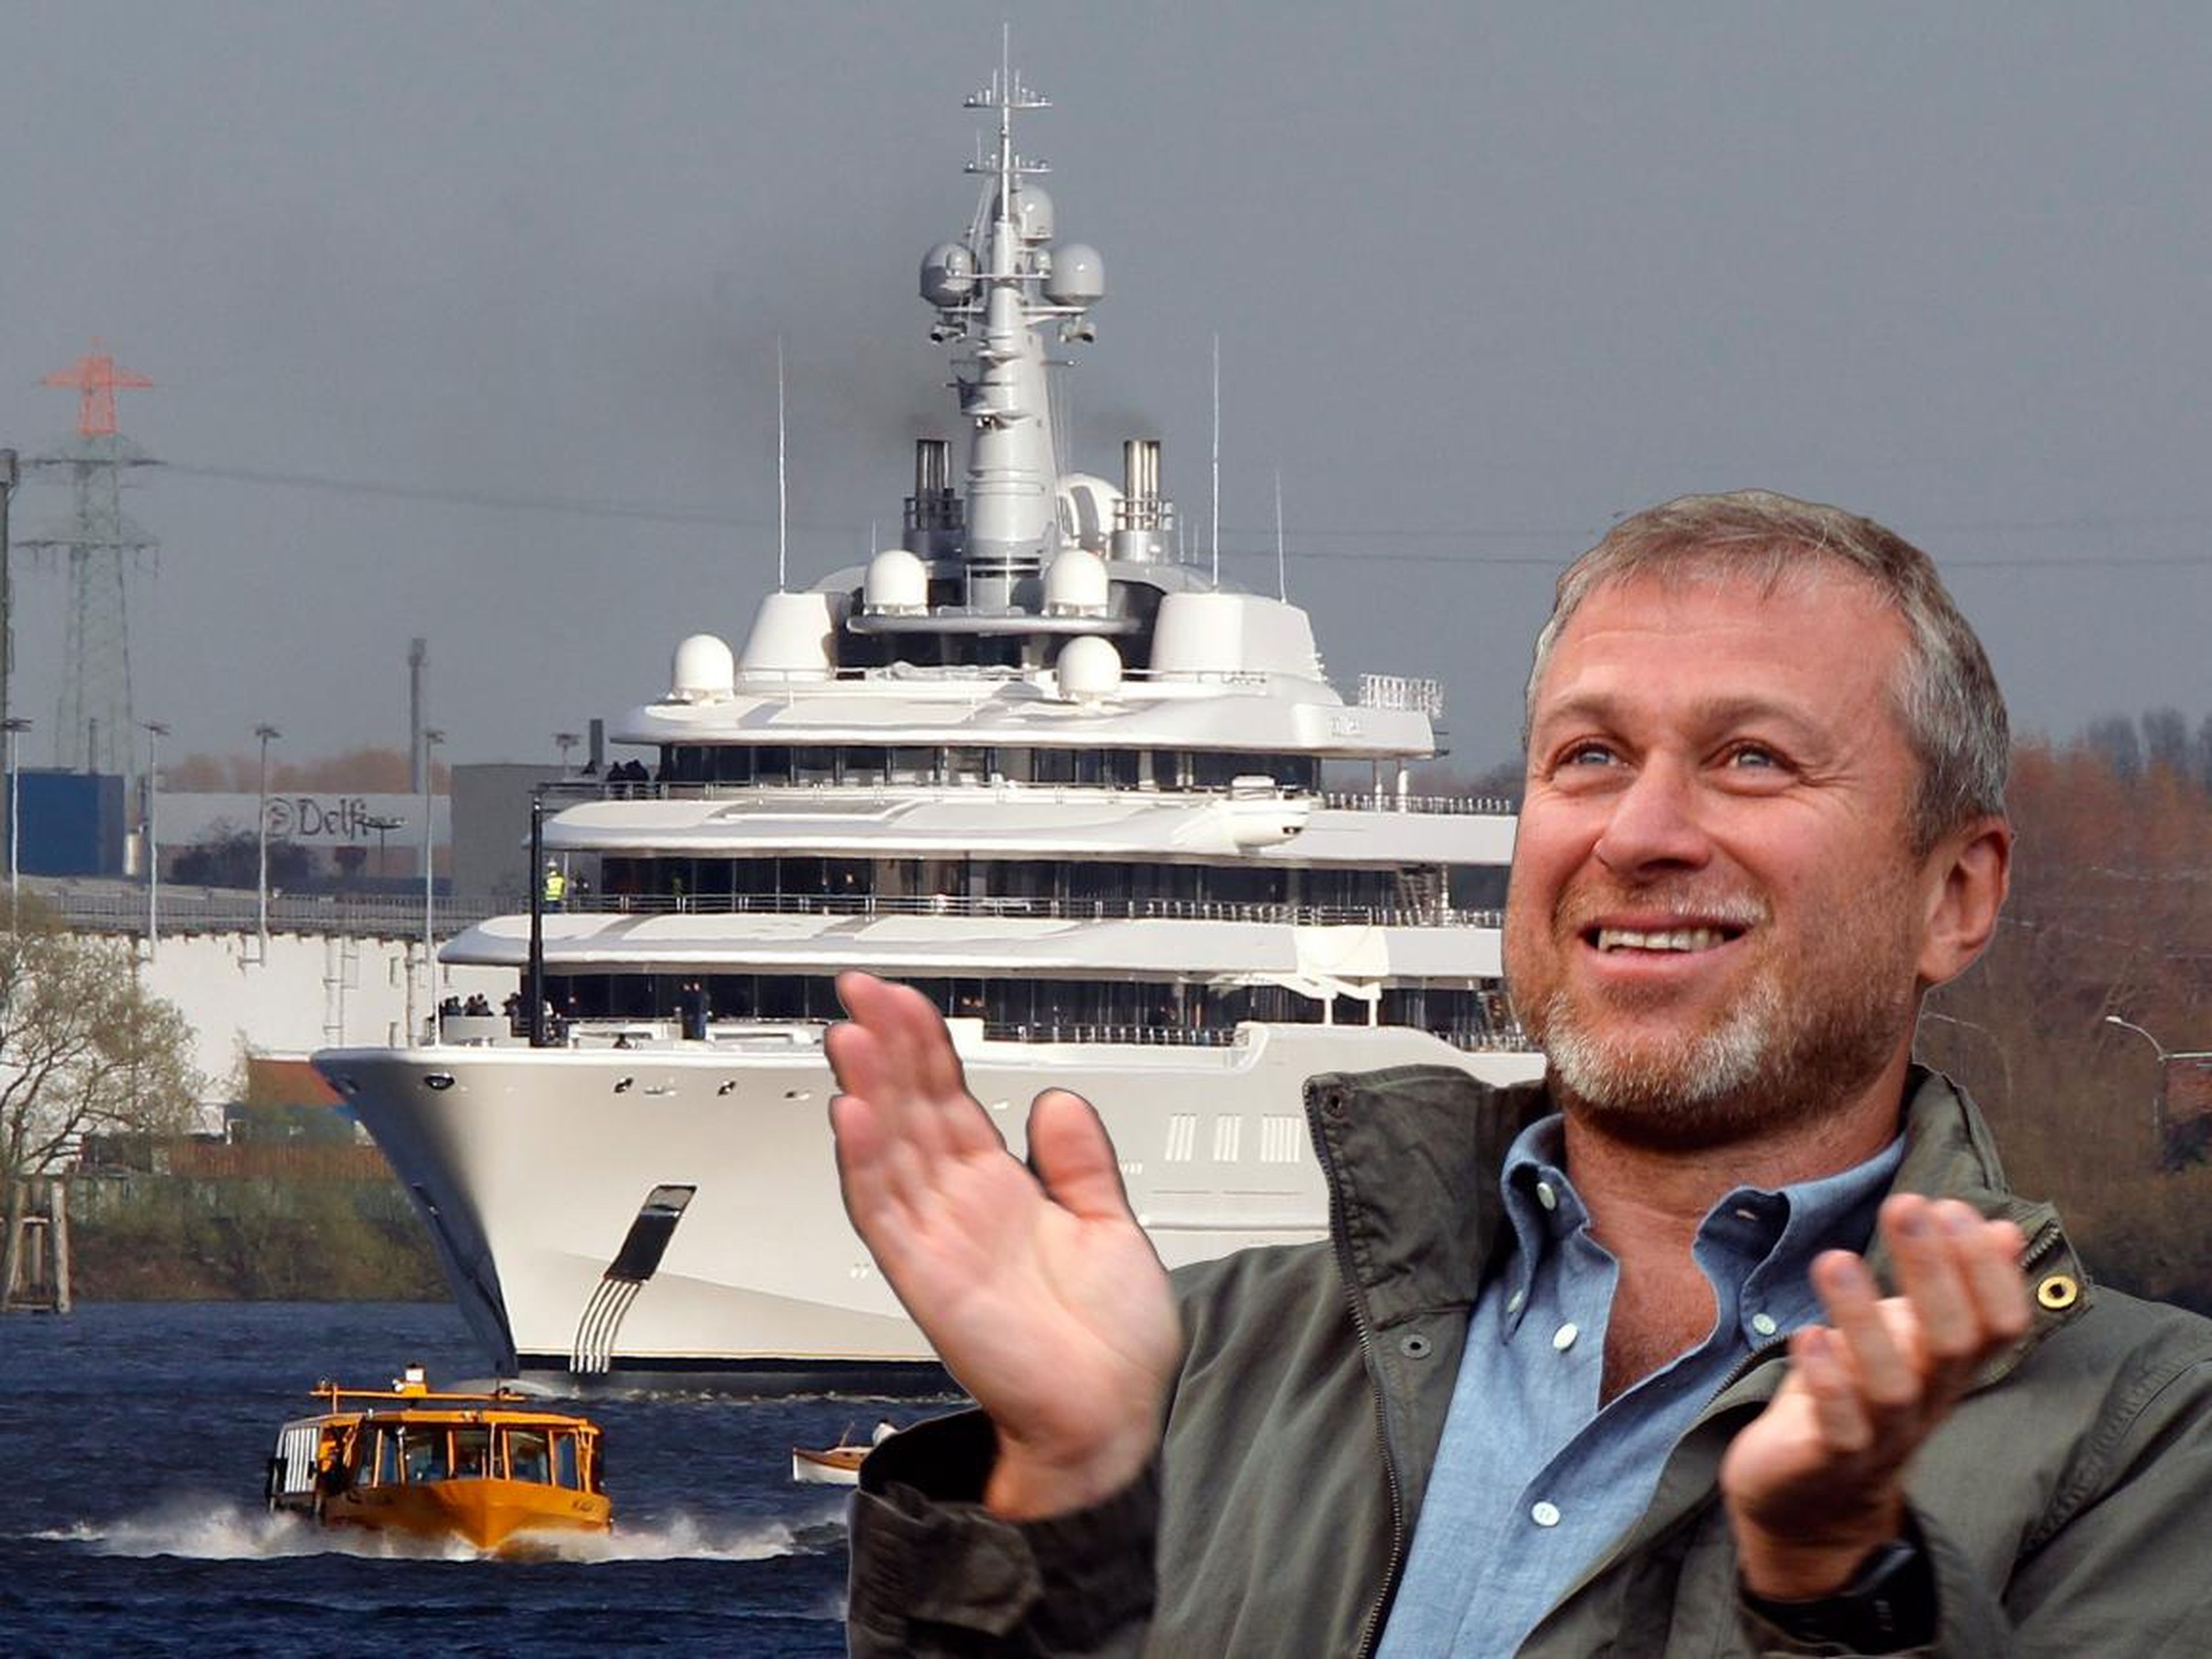 Some of the world's wealthiest people are owners of superyachts. Russian billionaire Roman Abramovich bought his yacht, Eclipse, in 2010. Reports of its cost vary, ranging from $600 million up to $1 billion.